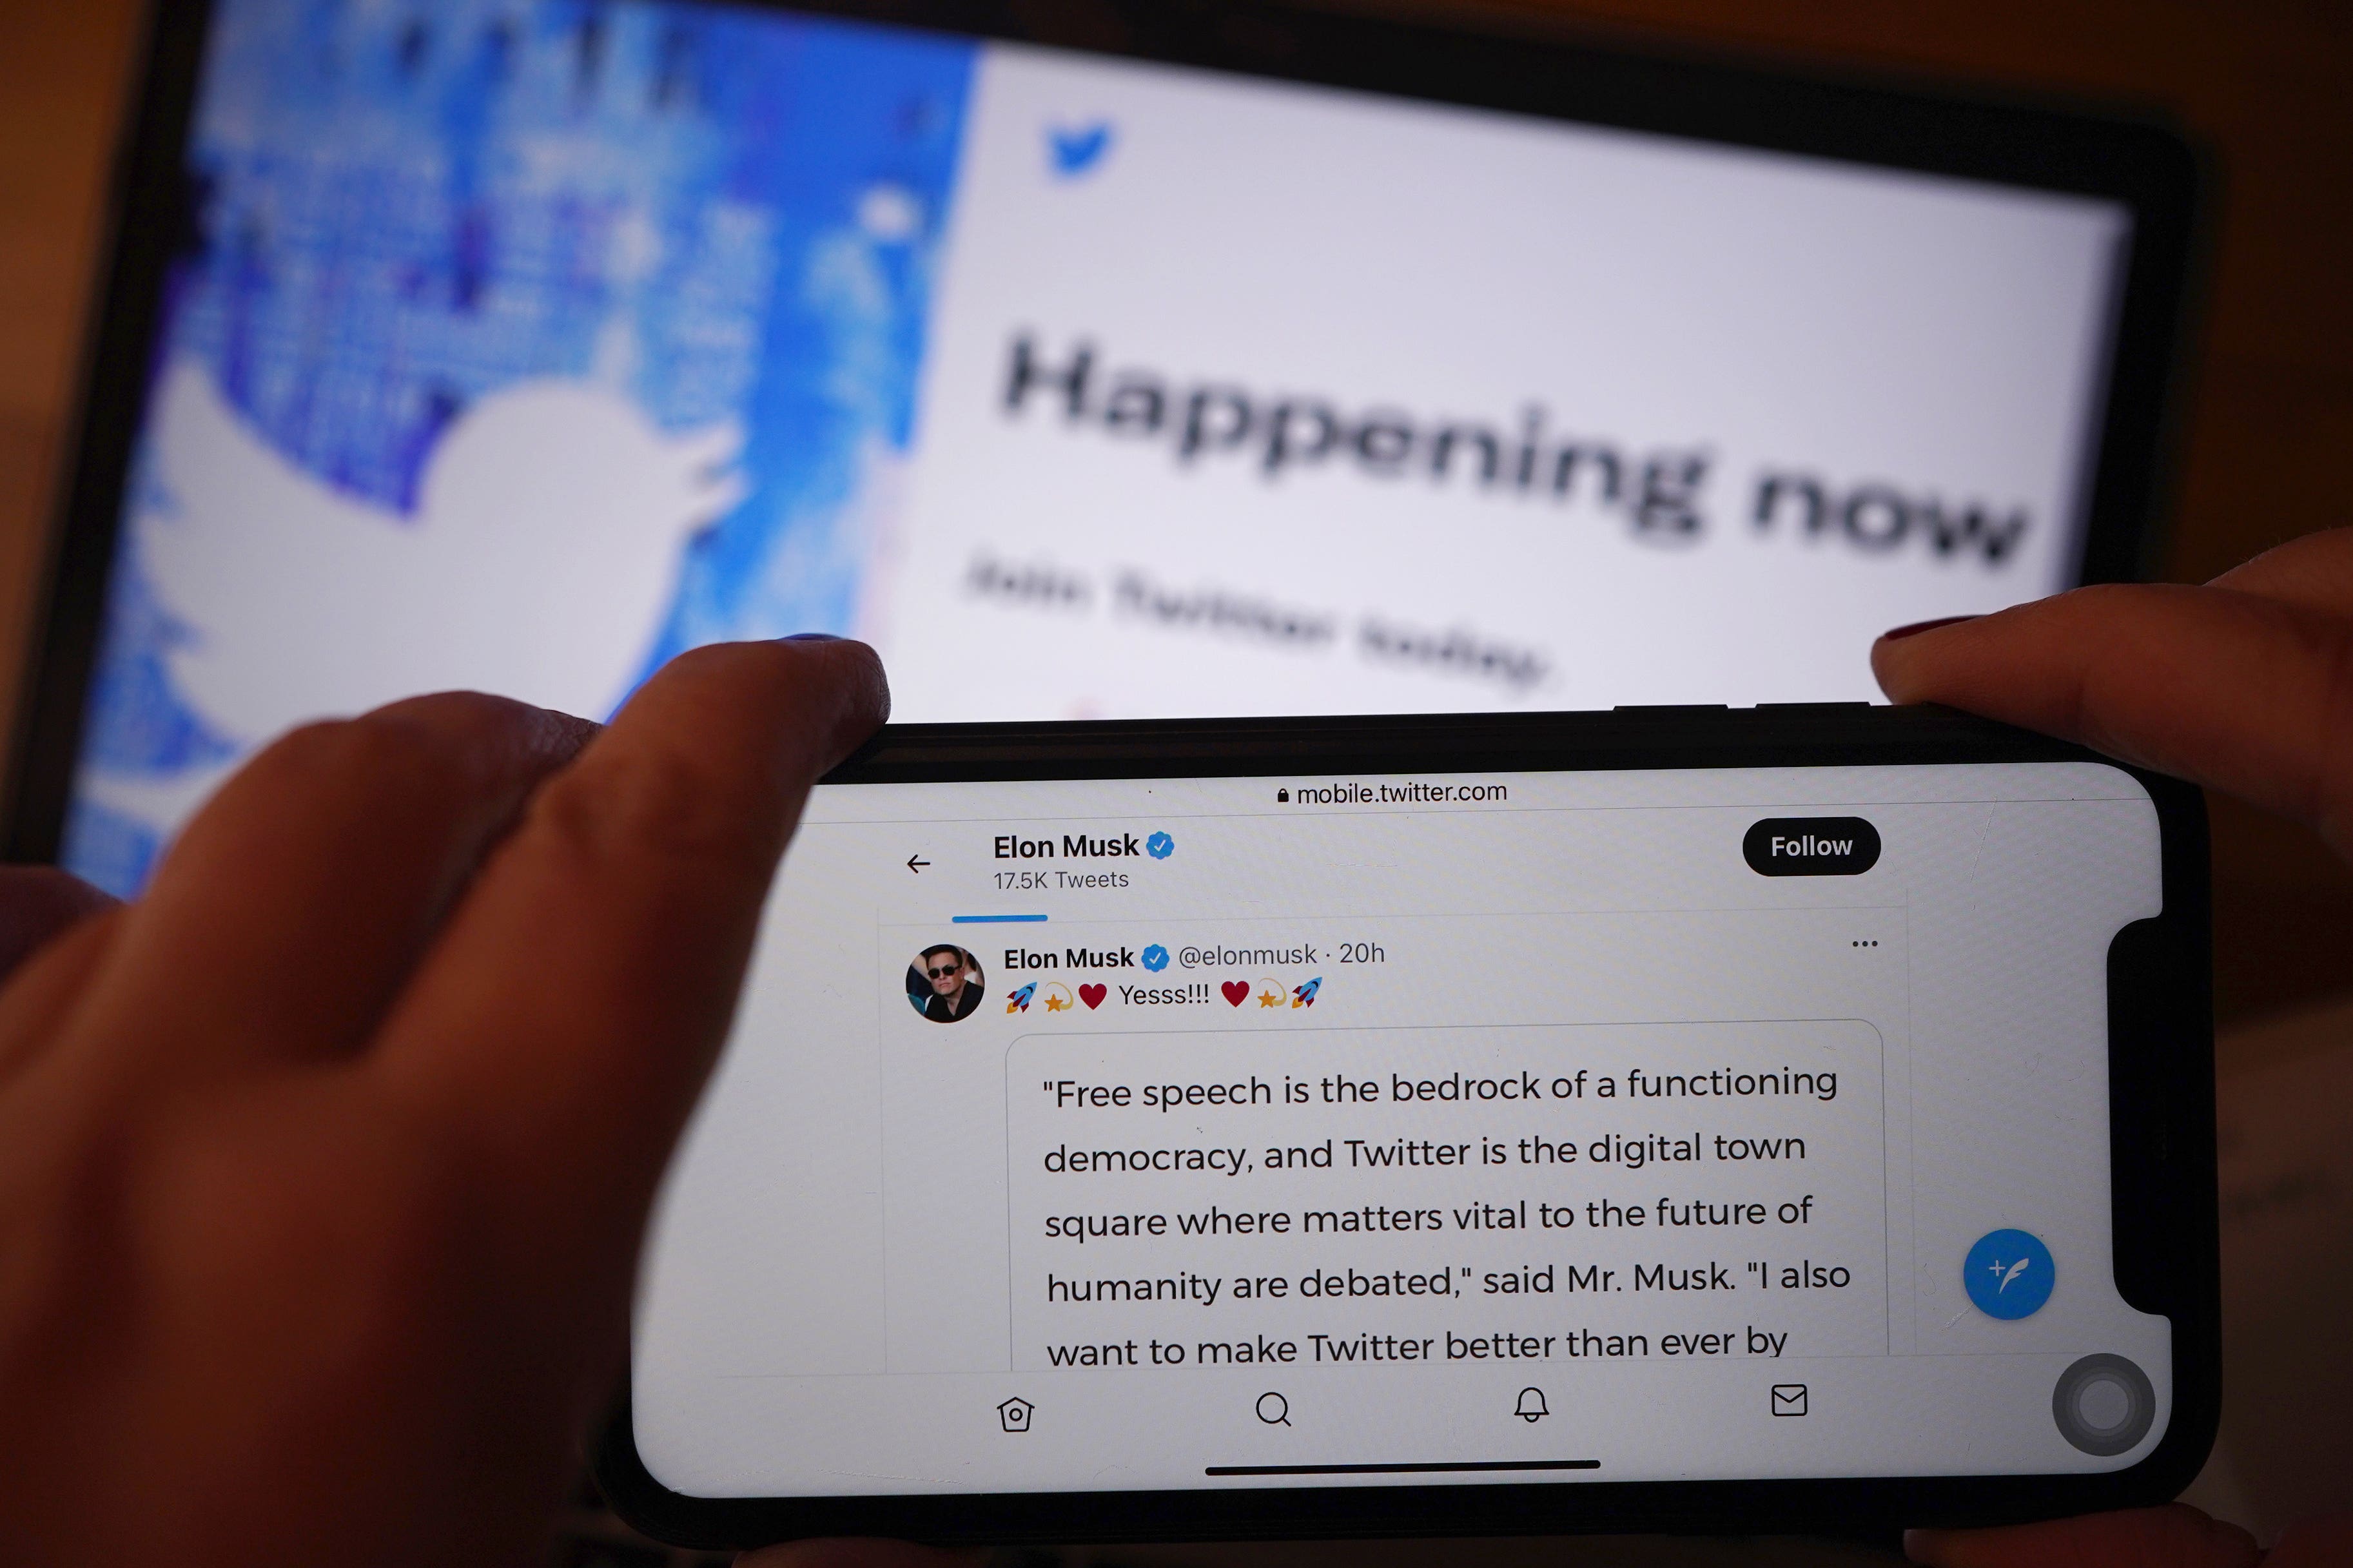 The Twitter social media app displaying a tweet by Elon Musk on a mobile phone in London, as Twitter has accepted billionaire Elon Musk’s bid to buy the company for ?34.5 billion.